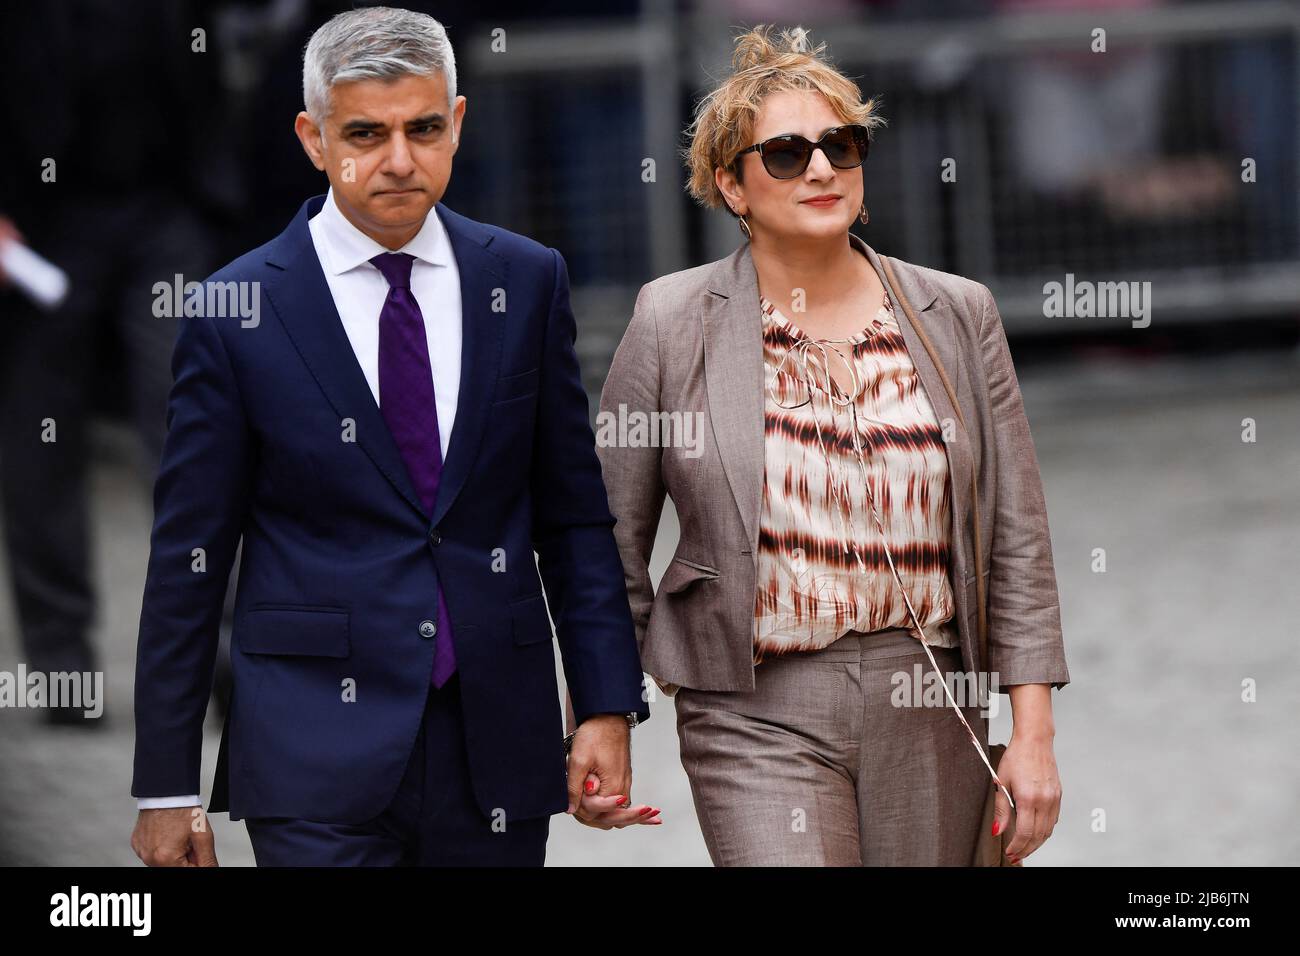 Mayor of London Sadiq Khan and his wife Saadiya Khan arriving for the National Service of Thanksgiving at St Paul's Cathedral, London, on day two of the Platinum Jubilee celebrations for Queen Elizabeth II. Picture date: Friday June 3, 2022. Stock Photo